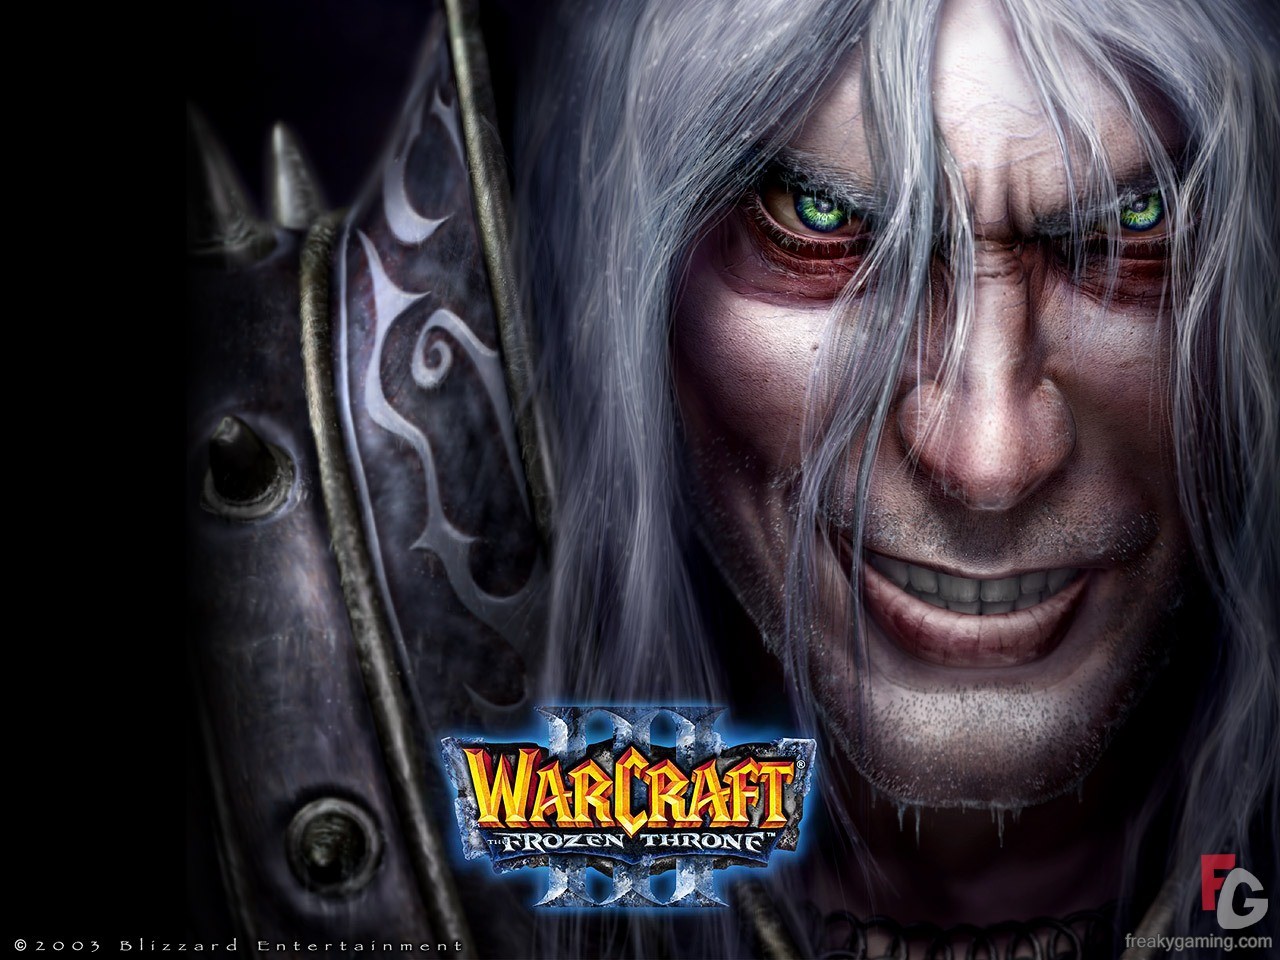 General 1280x960 Warcraft Arthas Menethil PC gaming fantasy men face closeup hair in face black background Frozen Throne World of Warcraft video game men video game characters Lich King